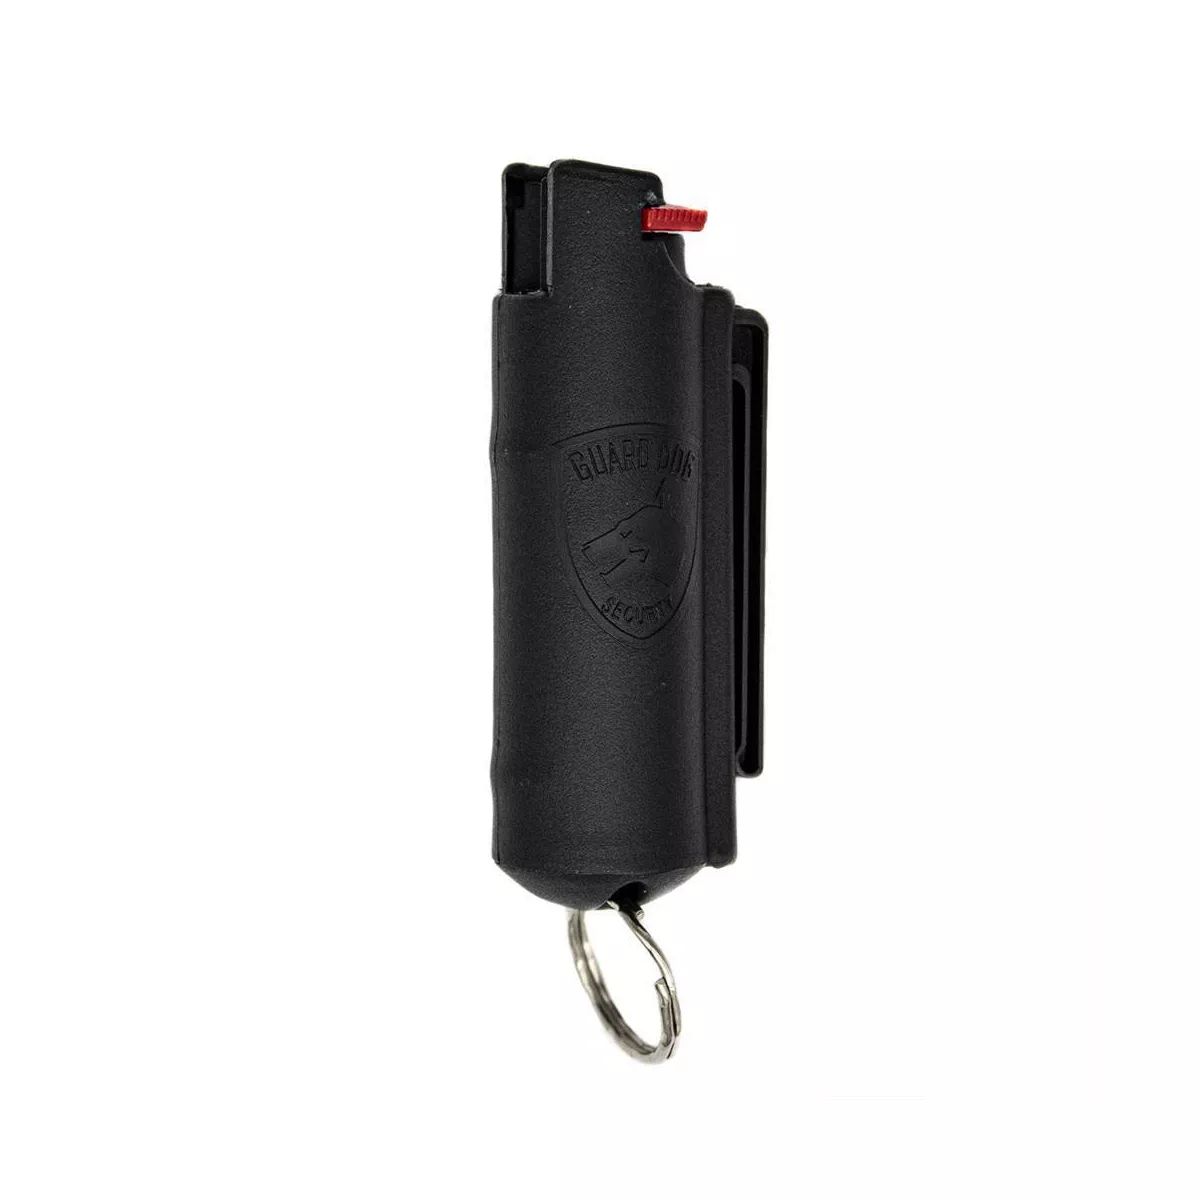 Guard Dog Security Quick Action Pepper Spray | Target